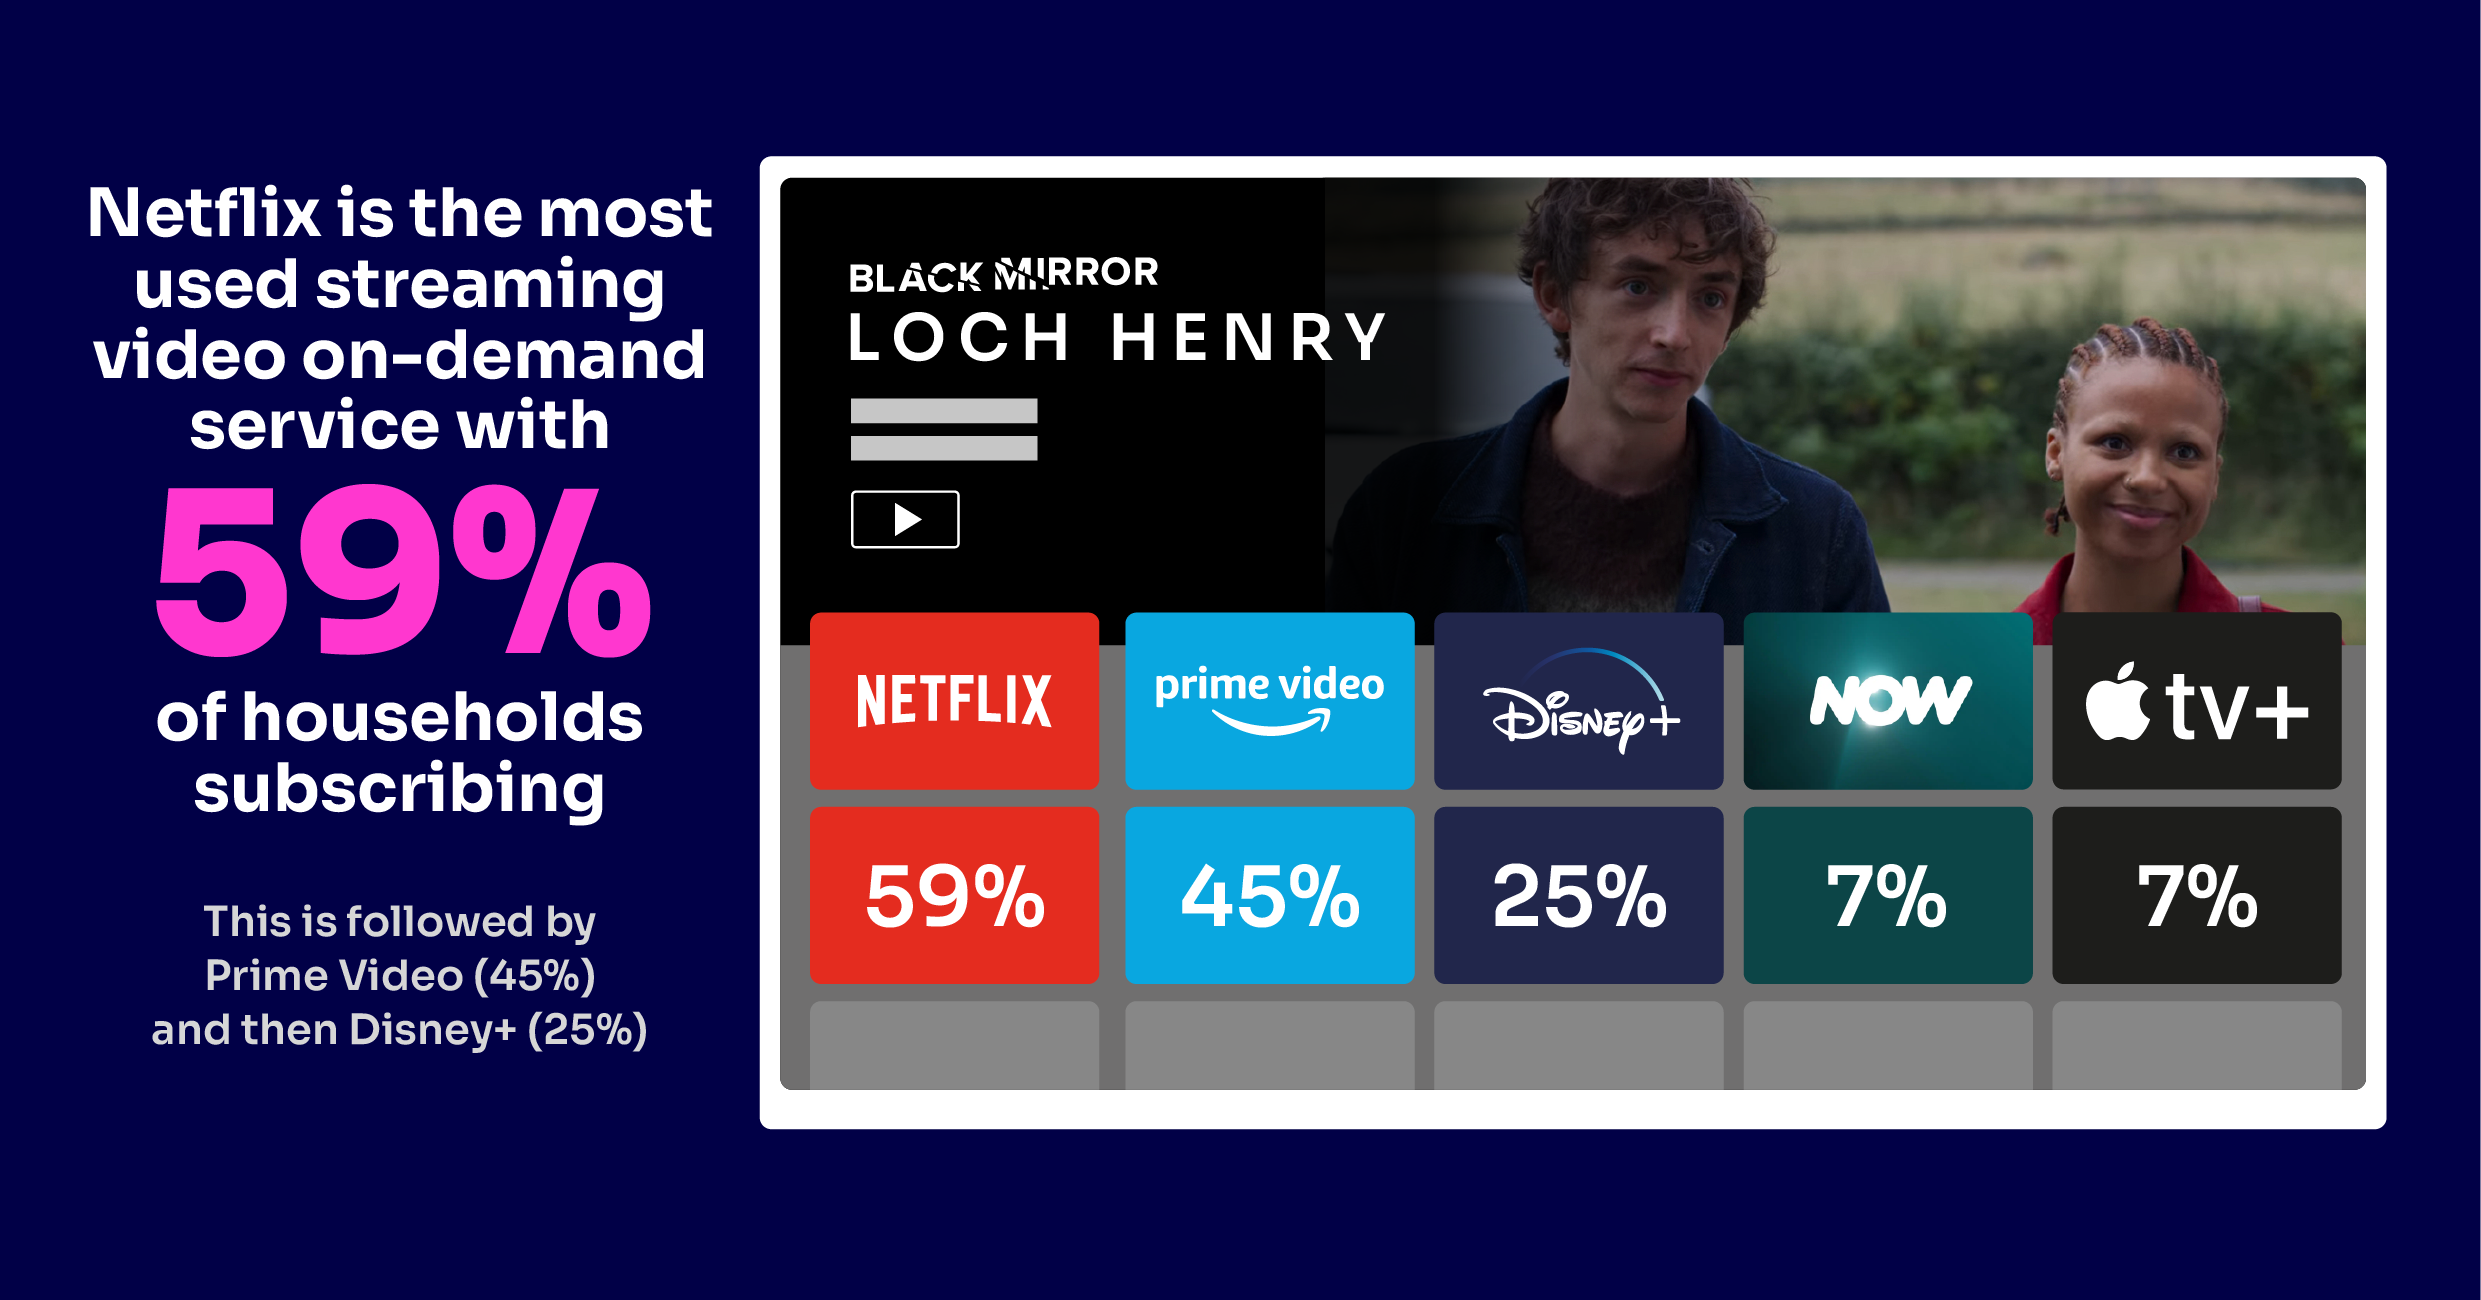 Netflix is the most used SVOD service in the UK with 59% subscribing households